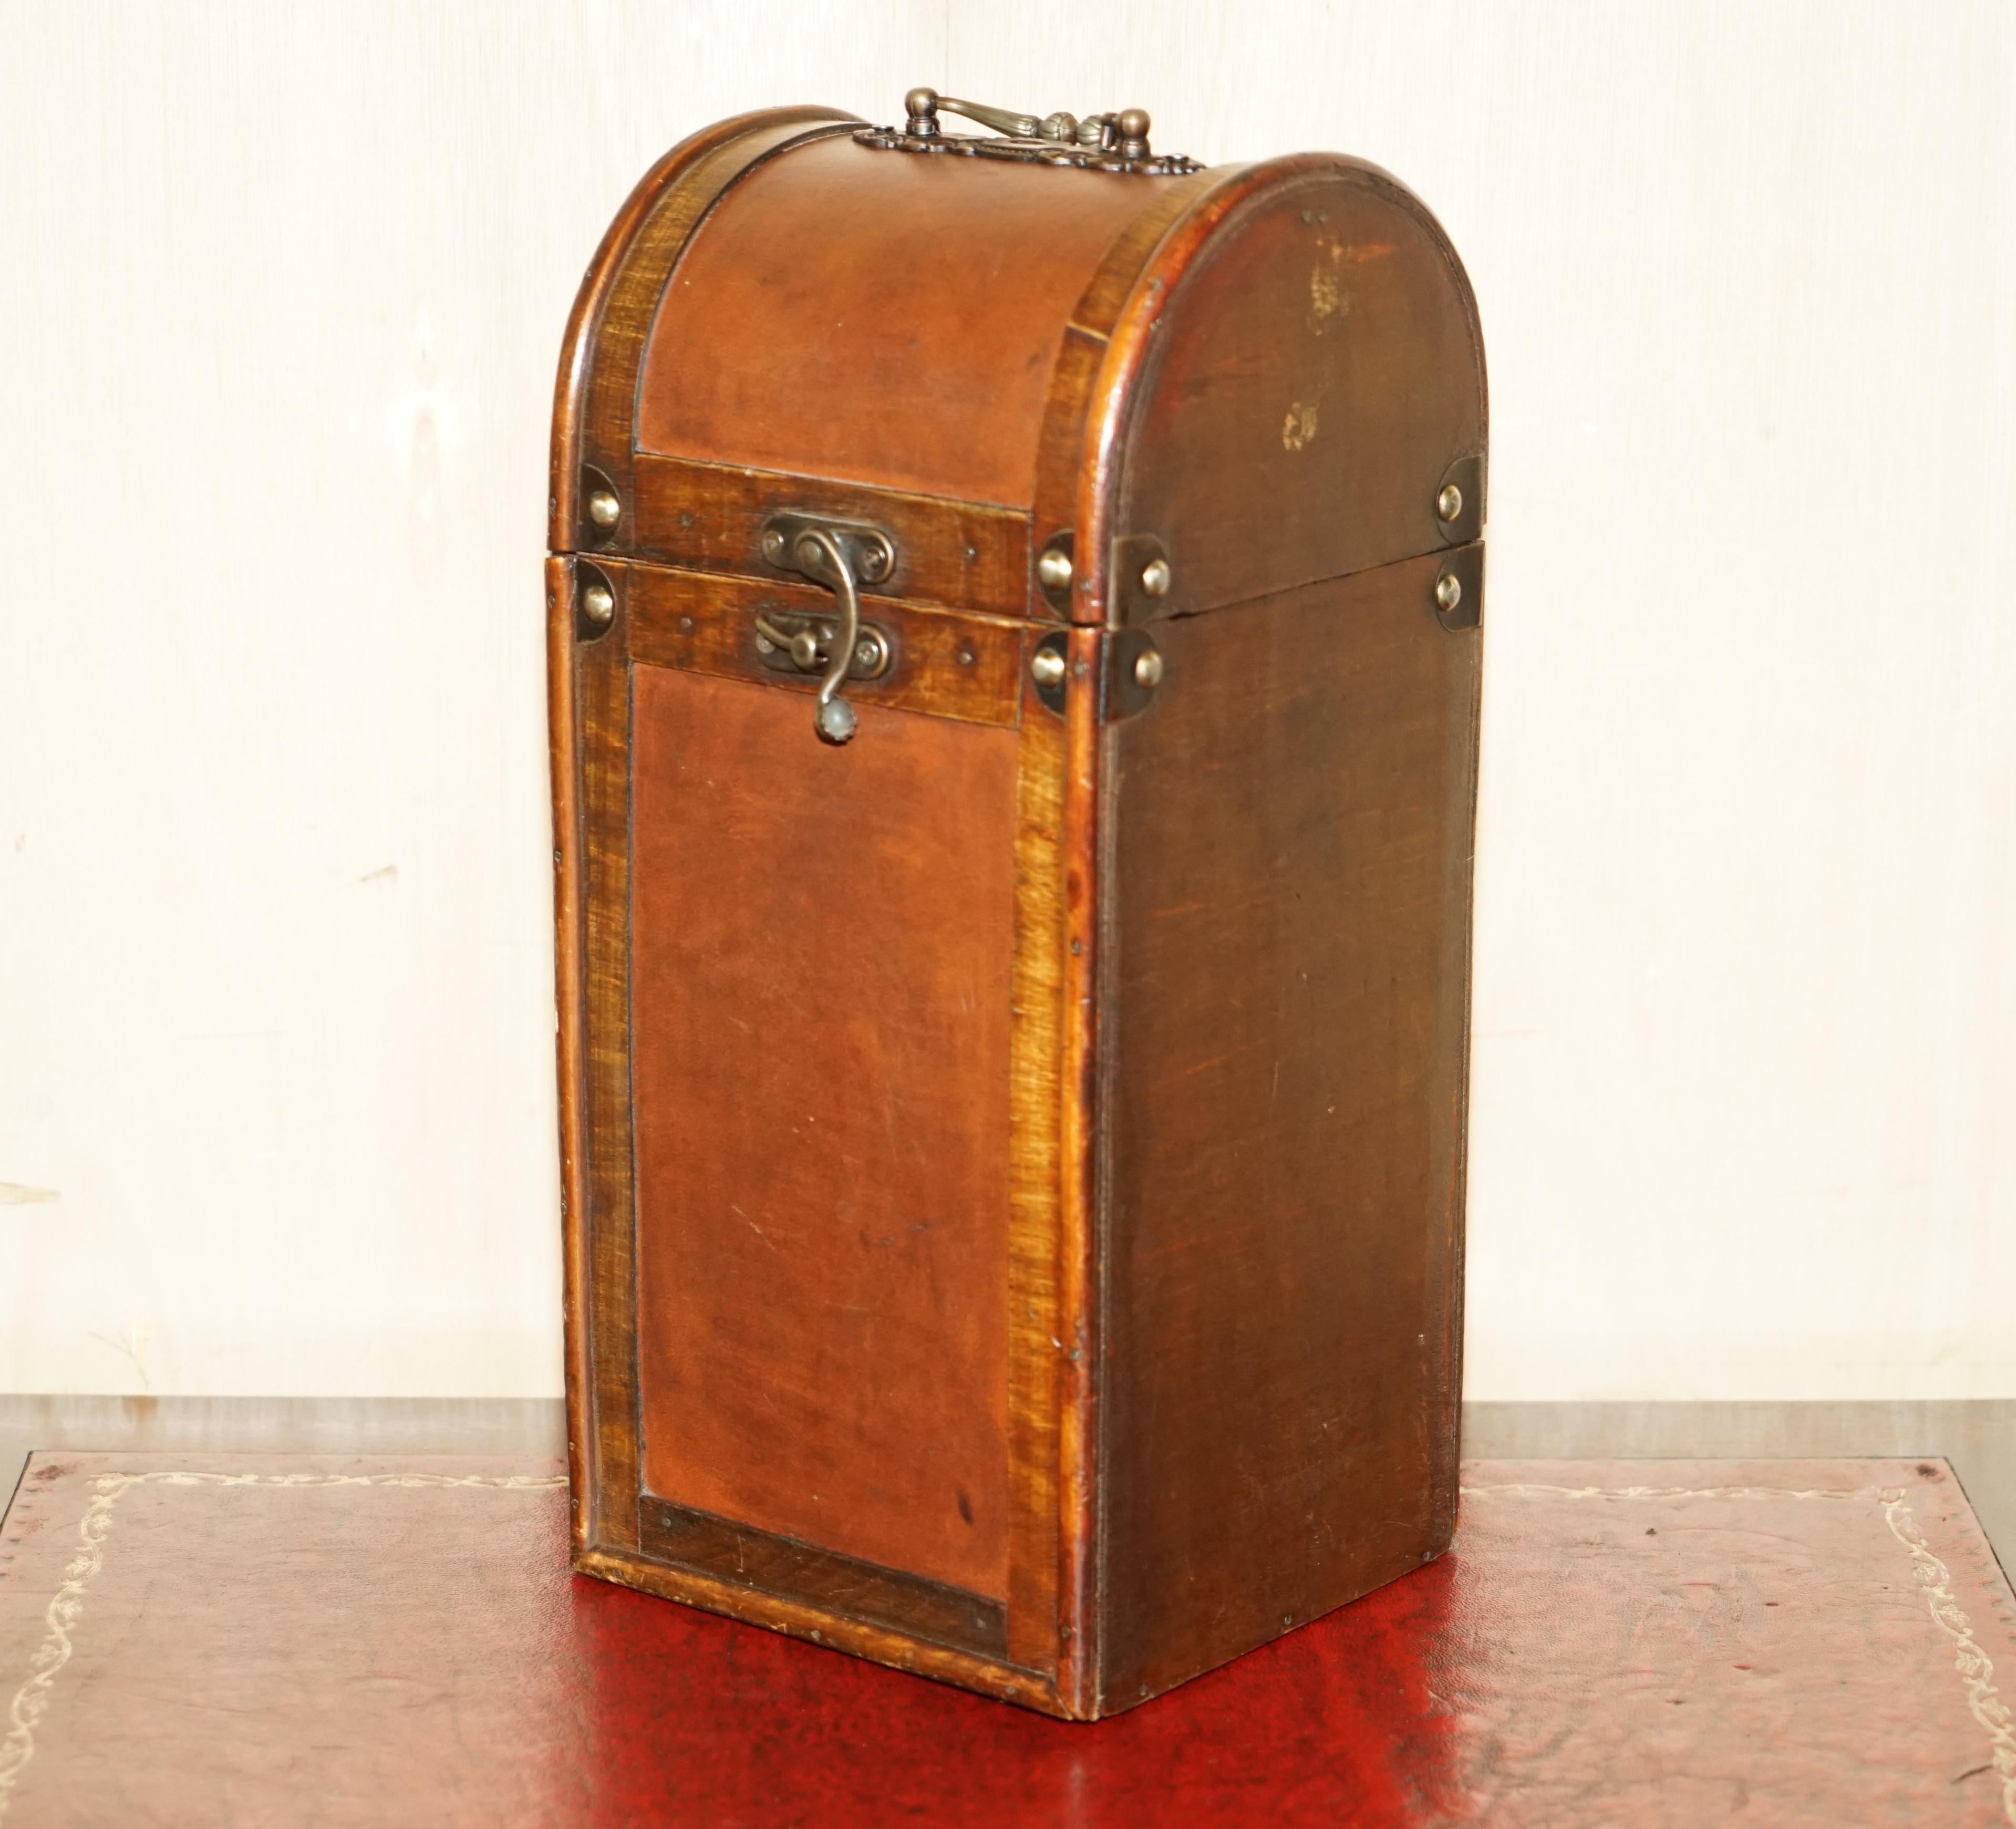 Royal House Antiques

Royal House Antiques is delighted to offer for sale this nice vintage wine bottle travel case with bronzed handles

A very good looking and well made piece, it really adds a sense of occasion to giving or storing a nice bottle